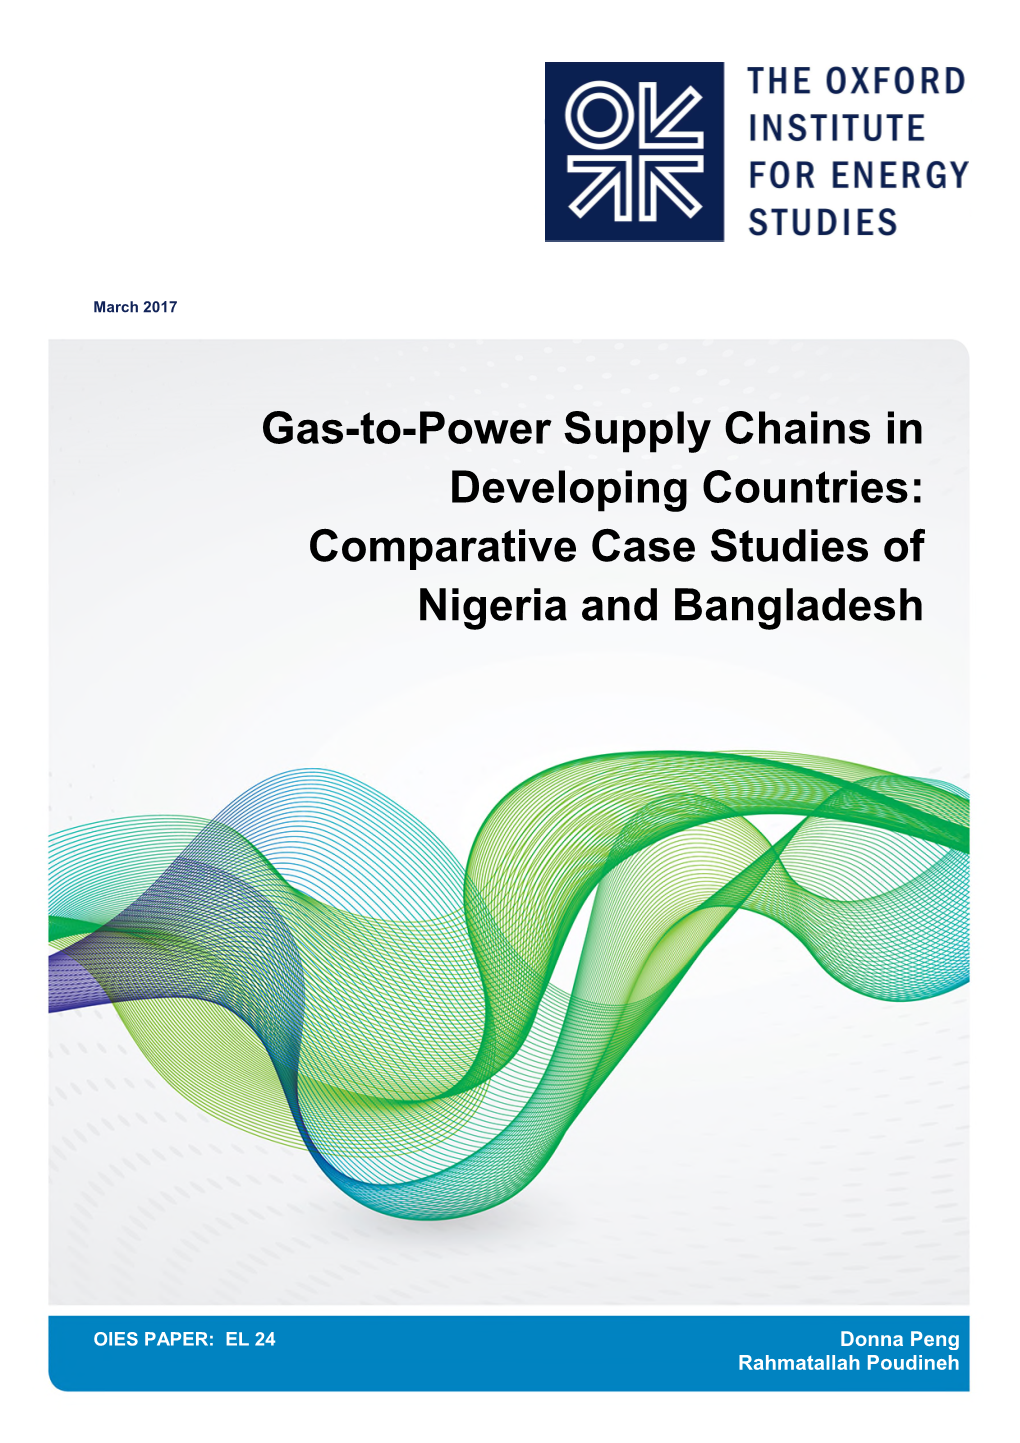 Gas-To-Power Supply Chains in Developing Countries: Comparative Case Studies of Nigeria and Bangladesh